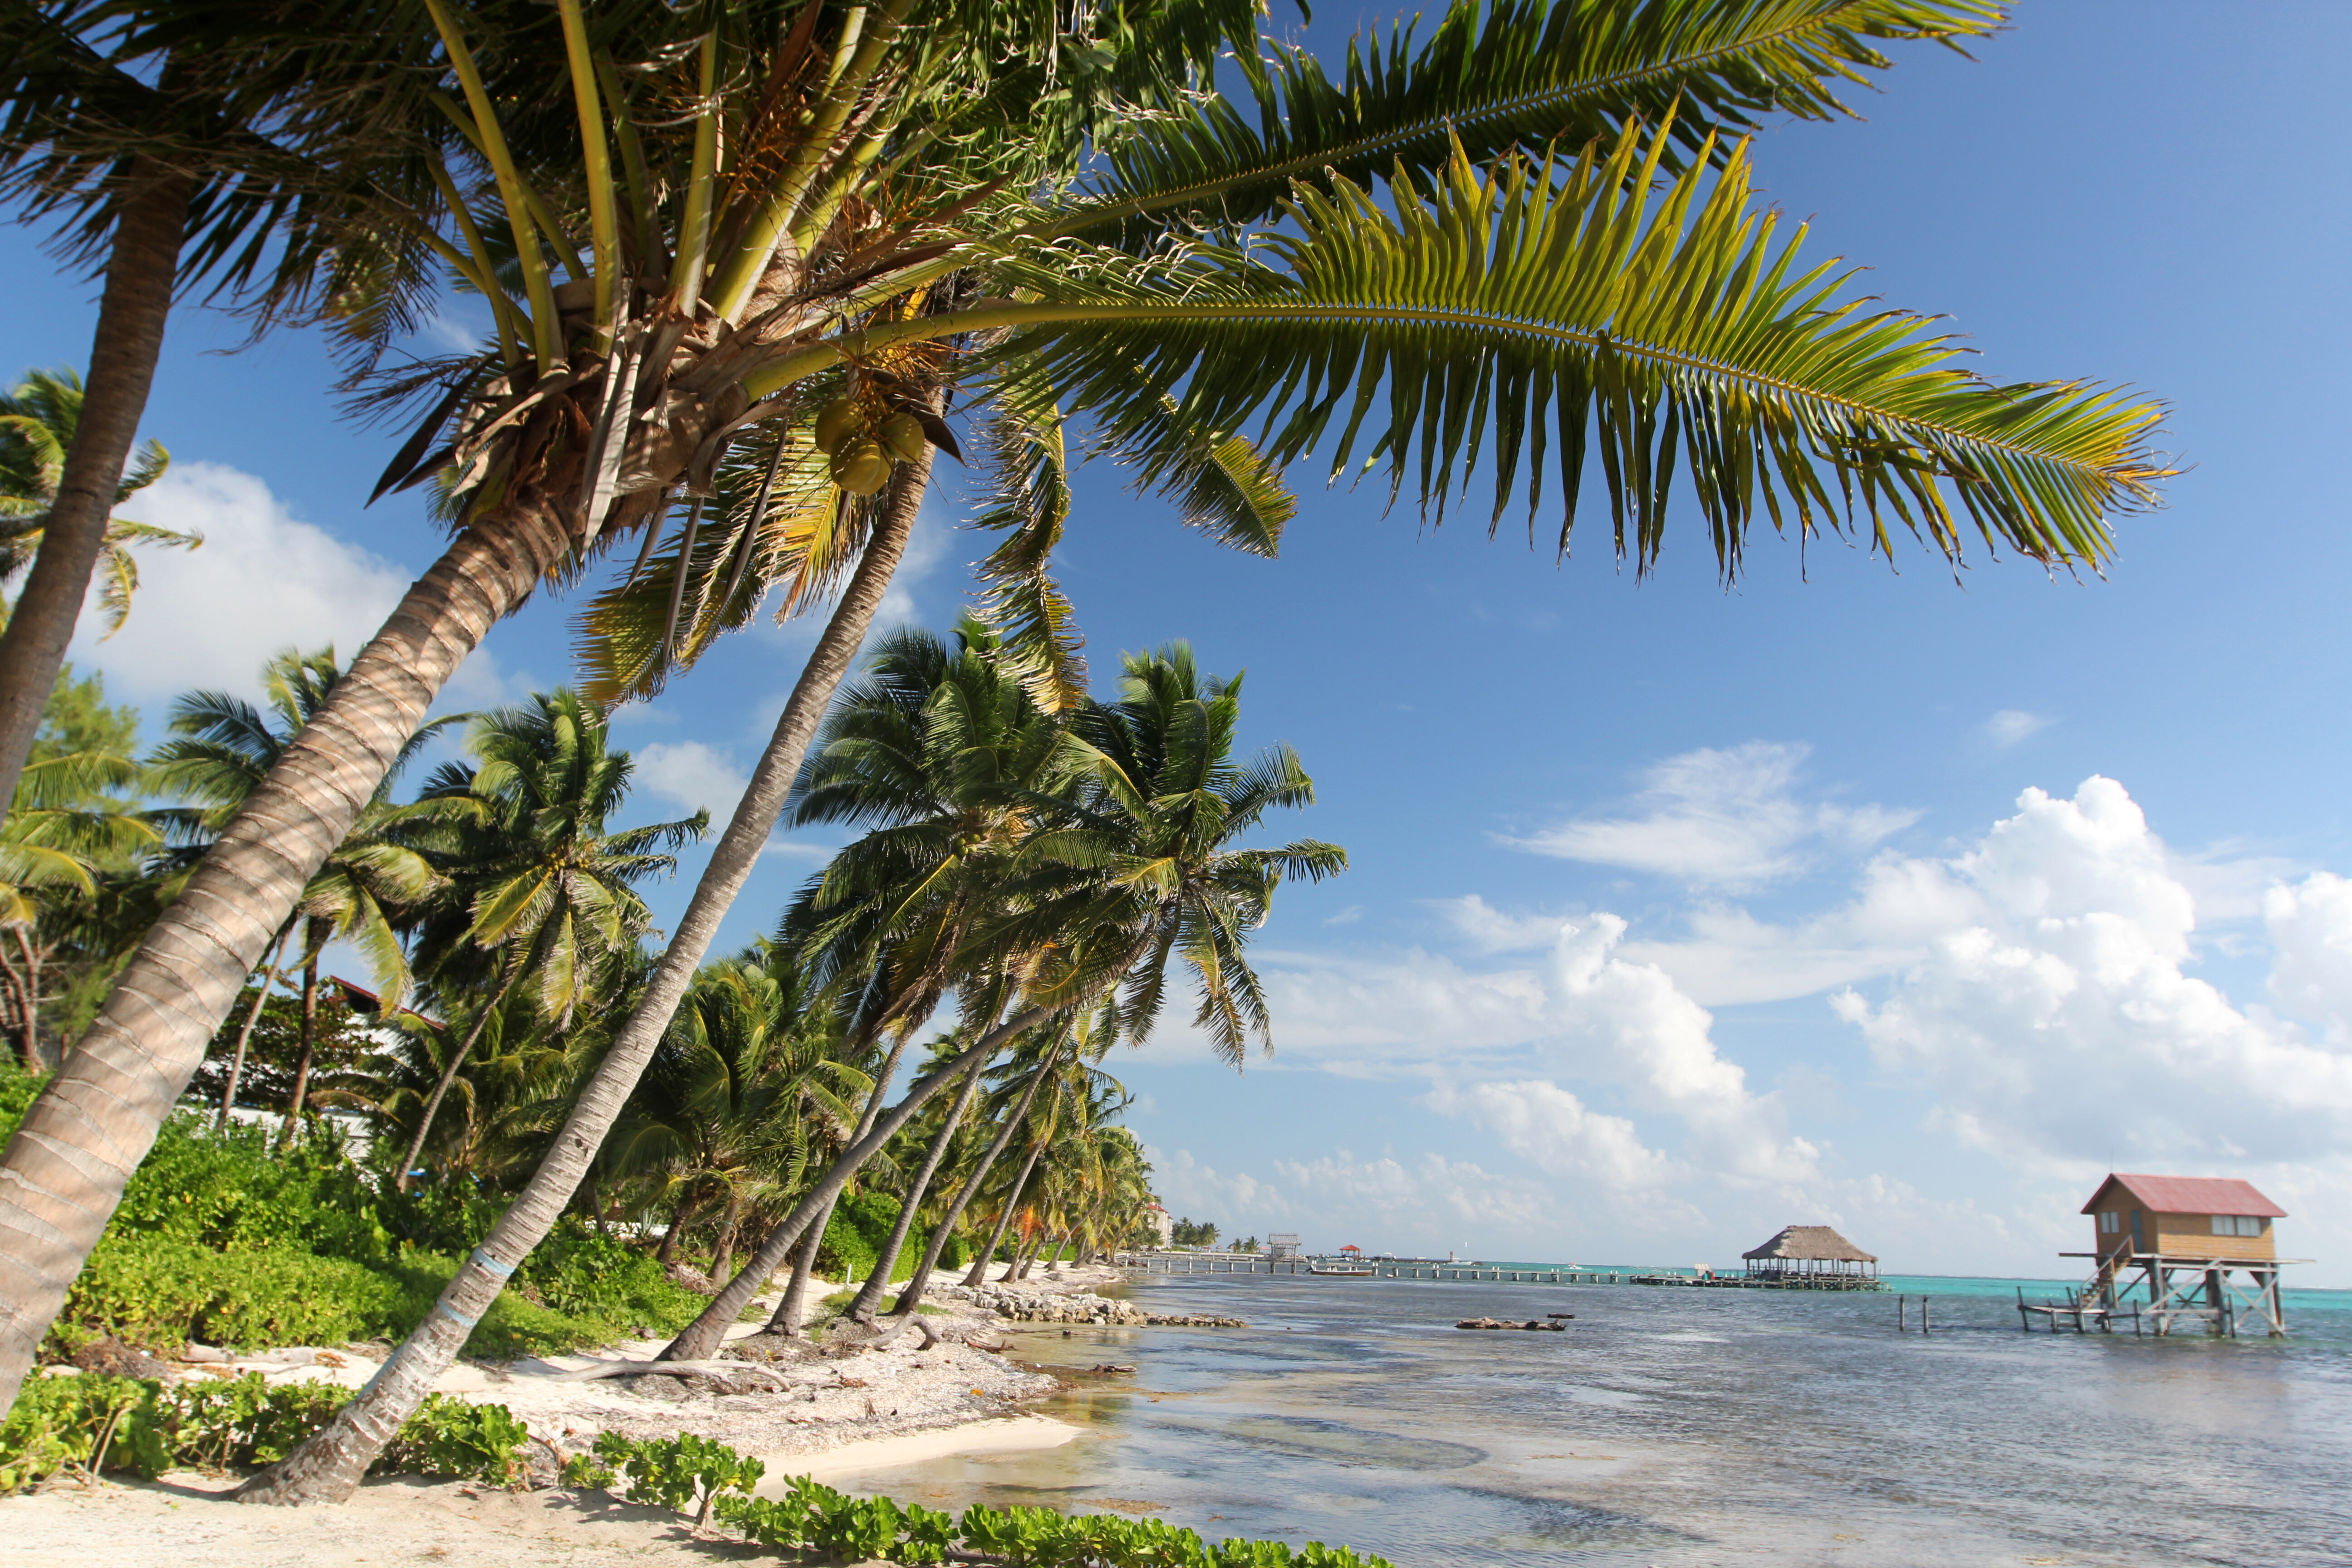 Palm trees along the shoreline in Belize